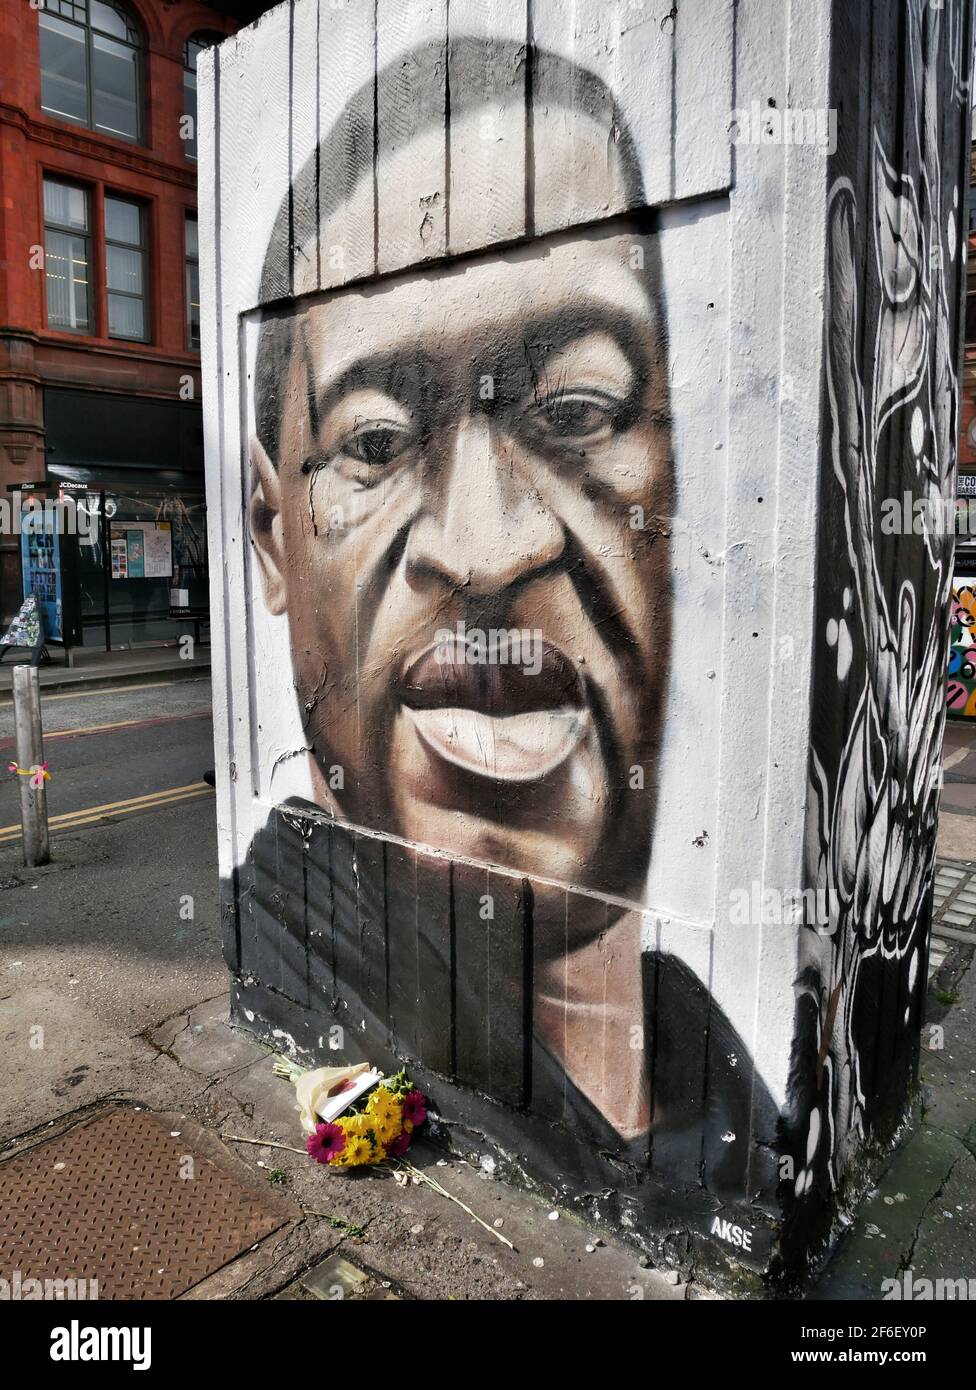 Manchester, UK. 31 March 2021. Flowers laid at a street art picture of George Floyd who died whilst being arrestedCredit: Julian Brown Stock Photo